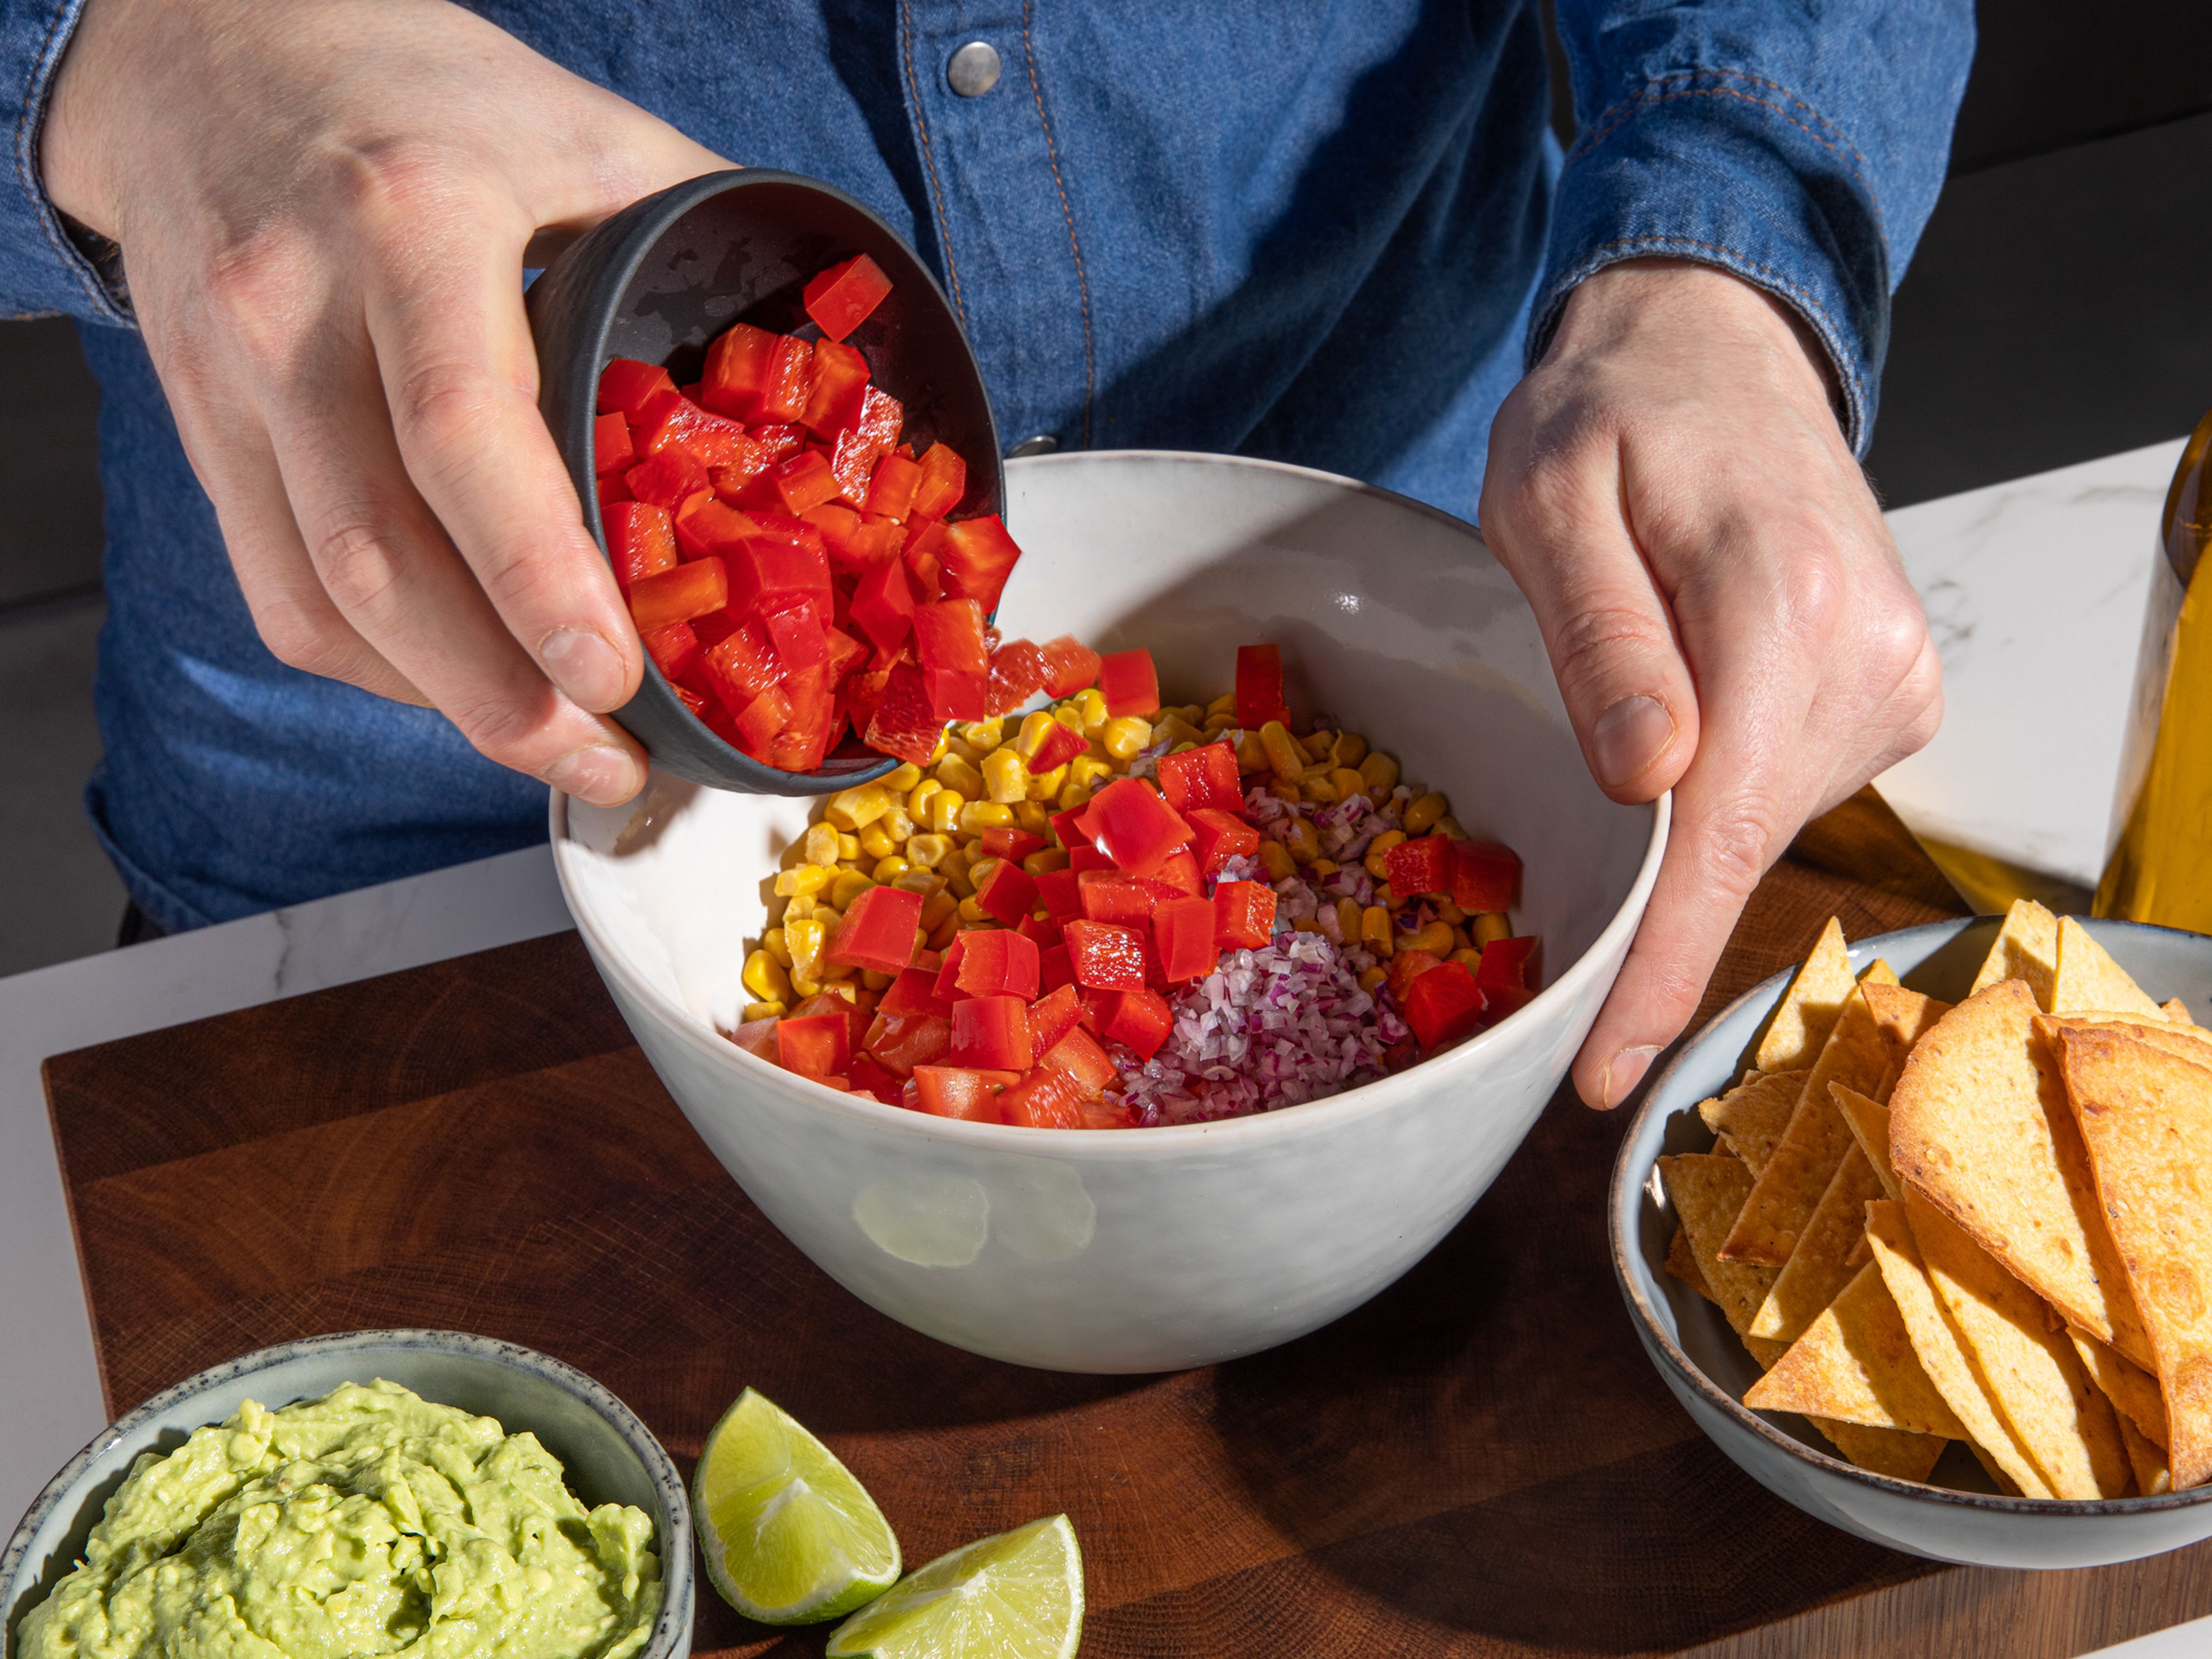 Make a quick guacamole by mashing the avocado with some lime juice to taste, then season with salt and pepper. Set aside. Drain corn, then dice tomato and deseeded red bell pepper. In a small bowl, mix together corn, tomatoes, bell pepper, and remaining red onion. Season to taste with olive oil, lime juice, salt, and pepper.